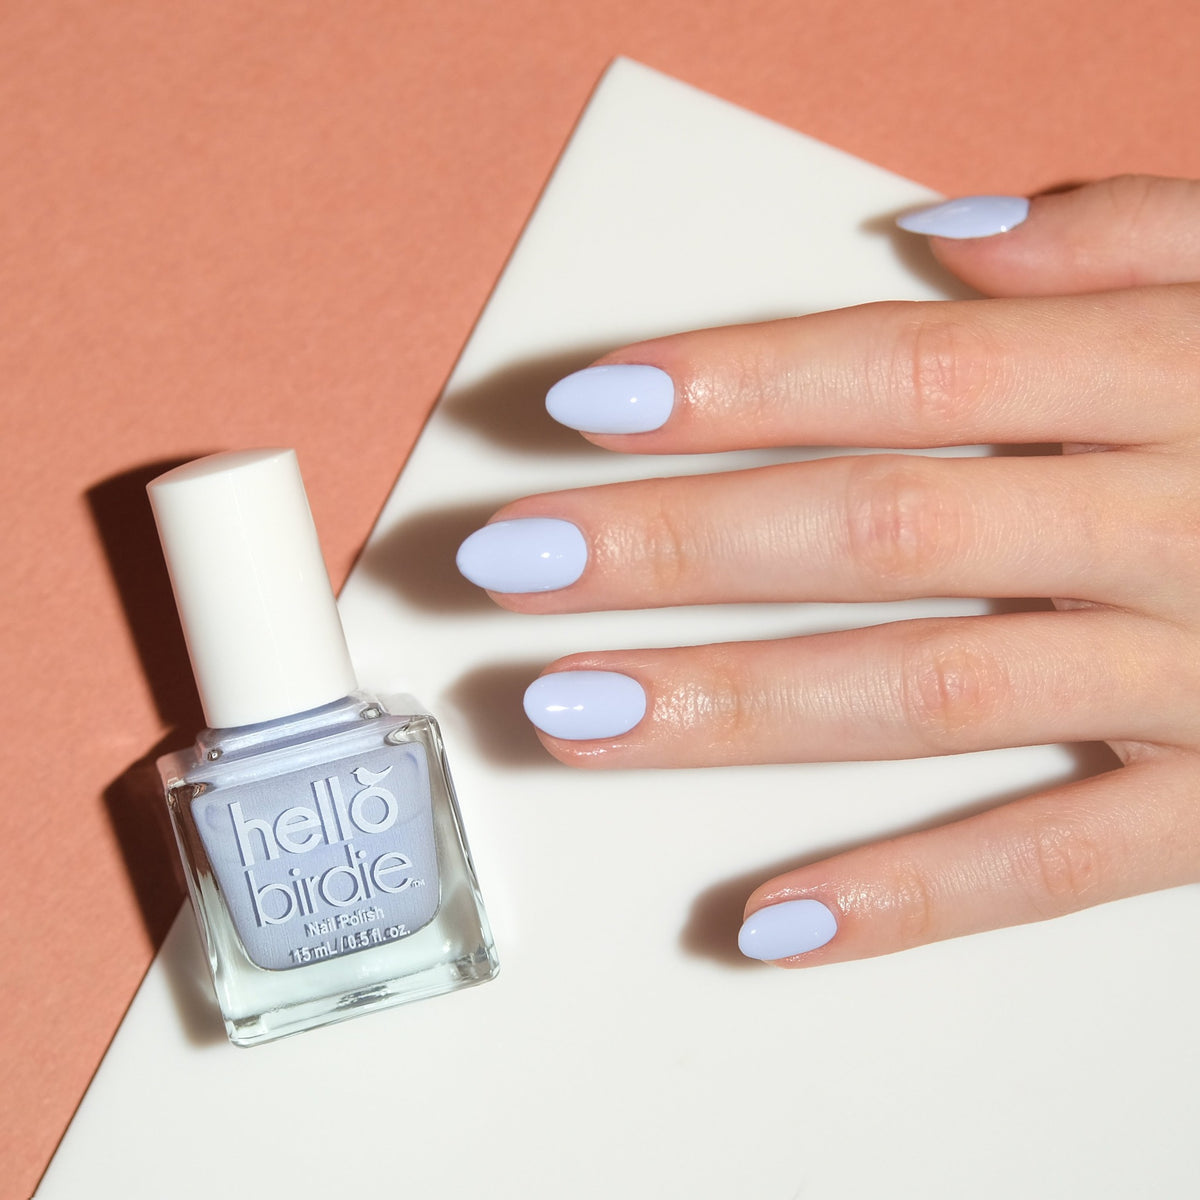 A close up of a light toned hand wearing Tweet Dreams nail polish from Hello Birdie which is a pale blue color. A bottle of the same polish is to the left of the hand and is cube shaped with a white cap and text. The hand is brightly lit in front of a cream and tan offset background.